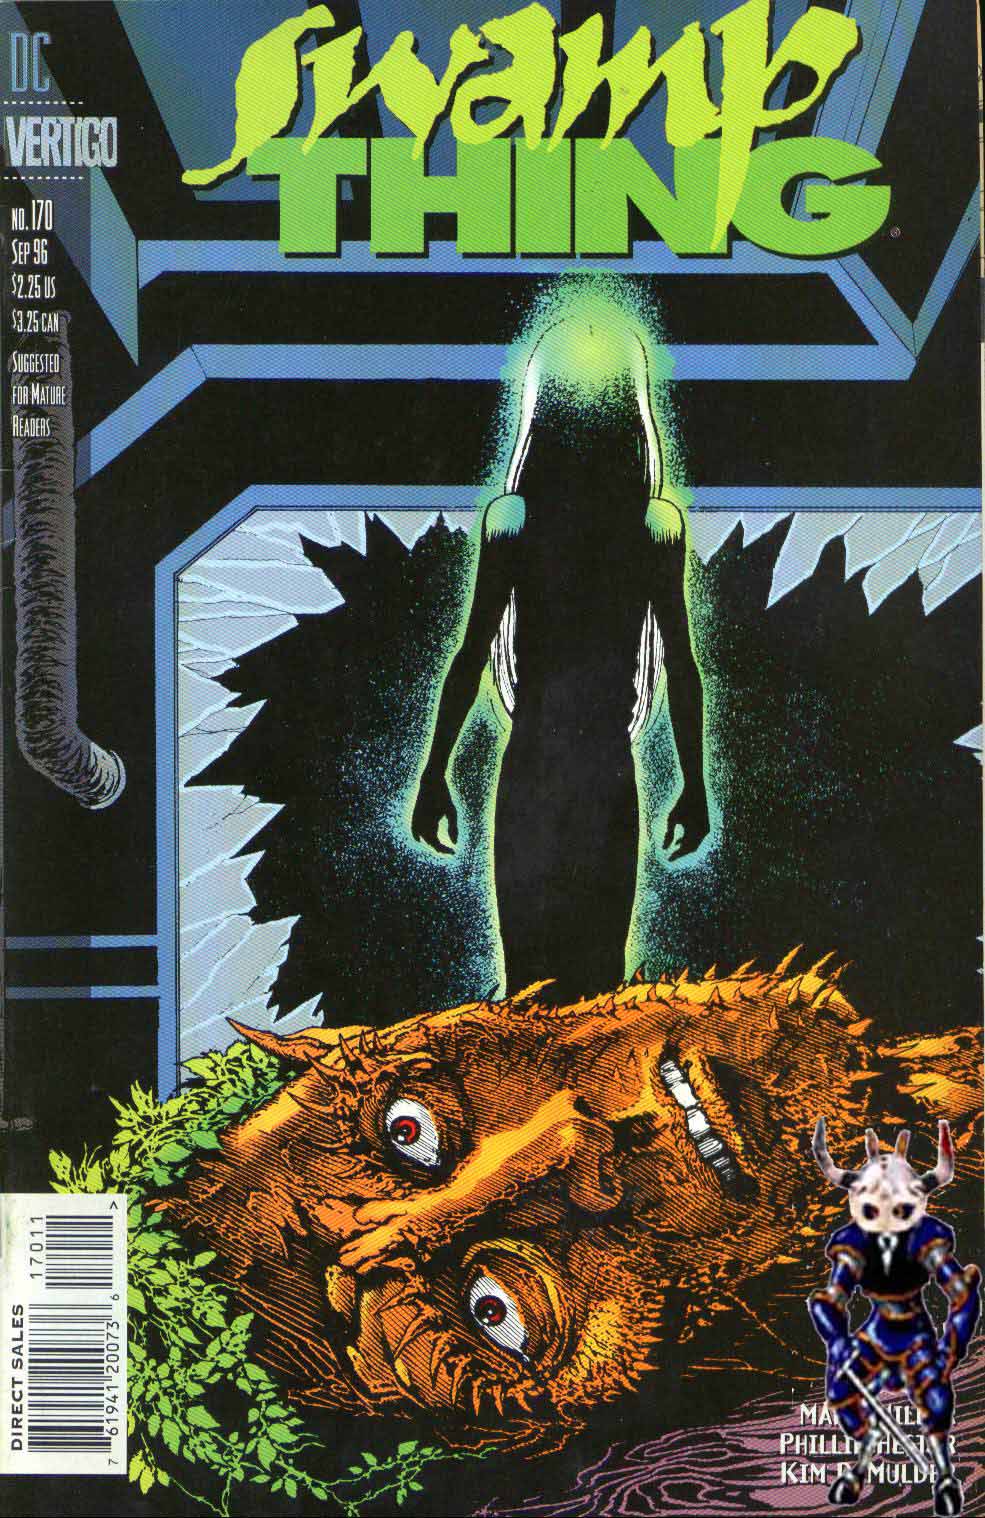 Read online Swamp Thing (1982) comic -  Issue #170 - 1